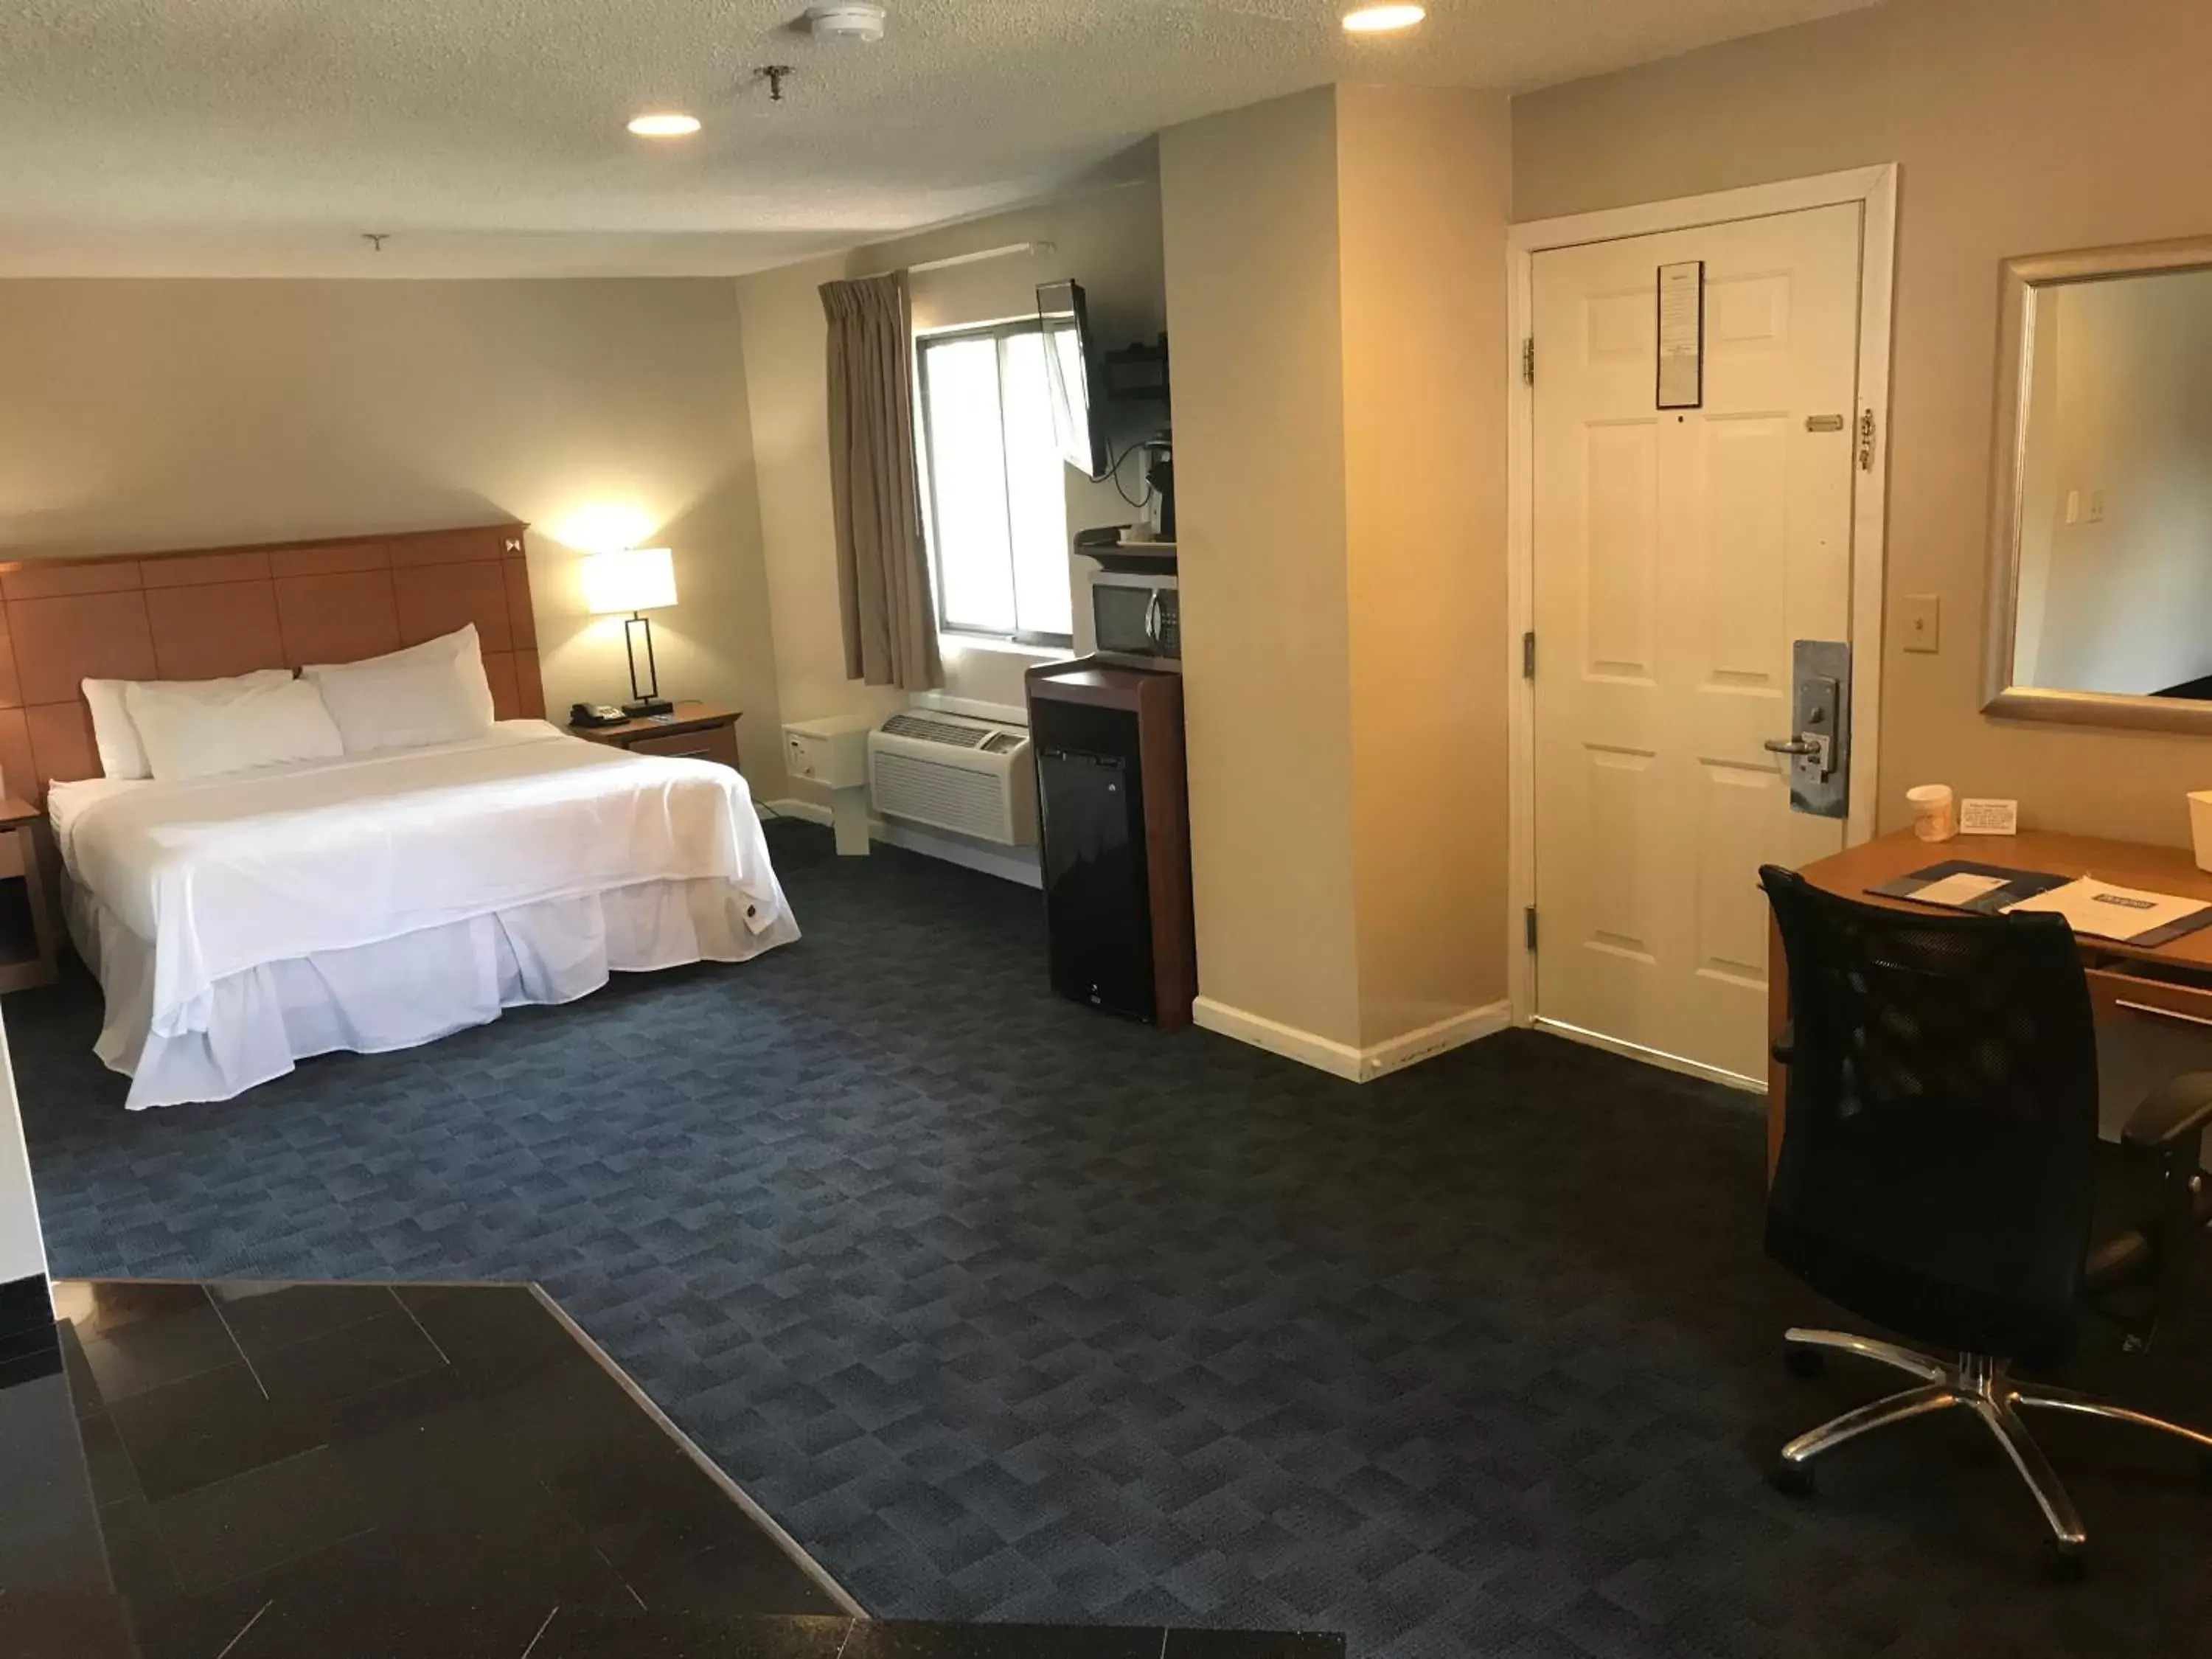 King Suite with Hot Tub - Non-Smoking in Americas Best Value Inn Torrington, CT